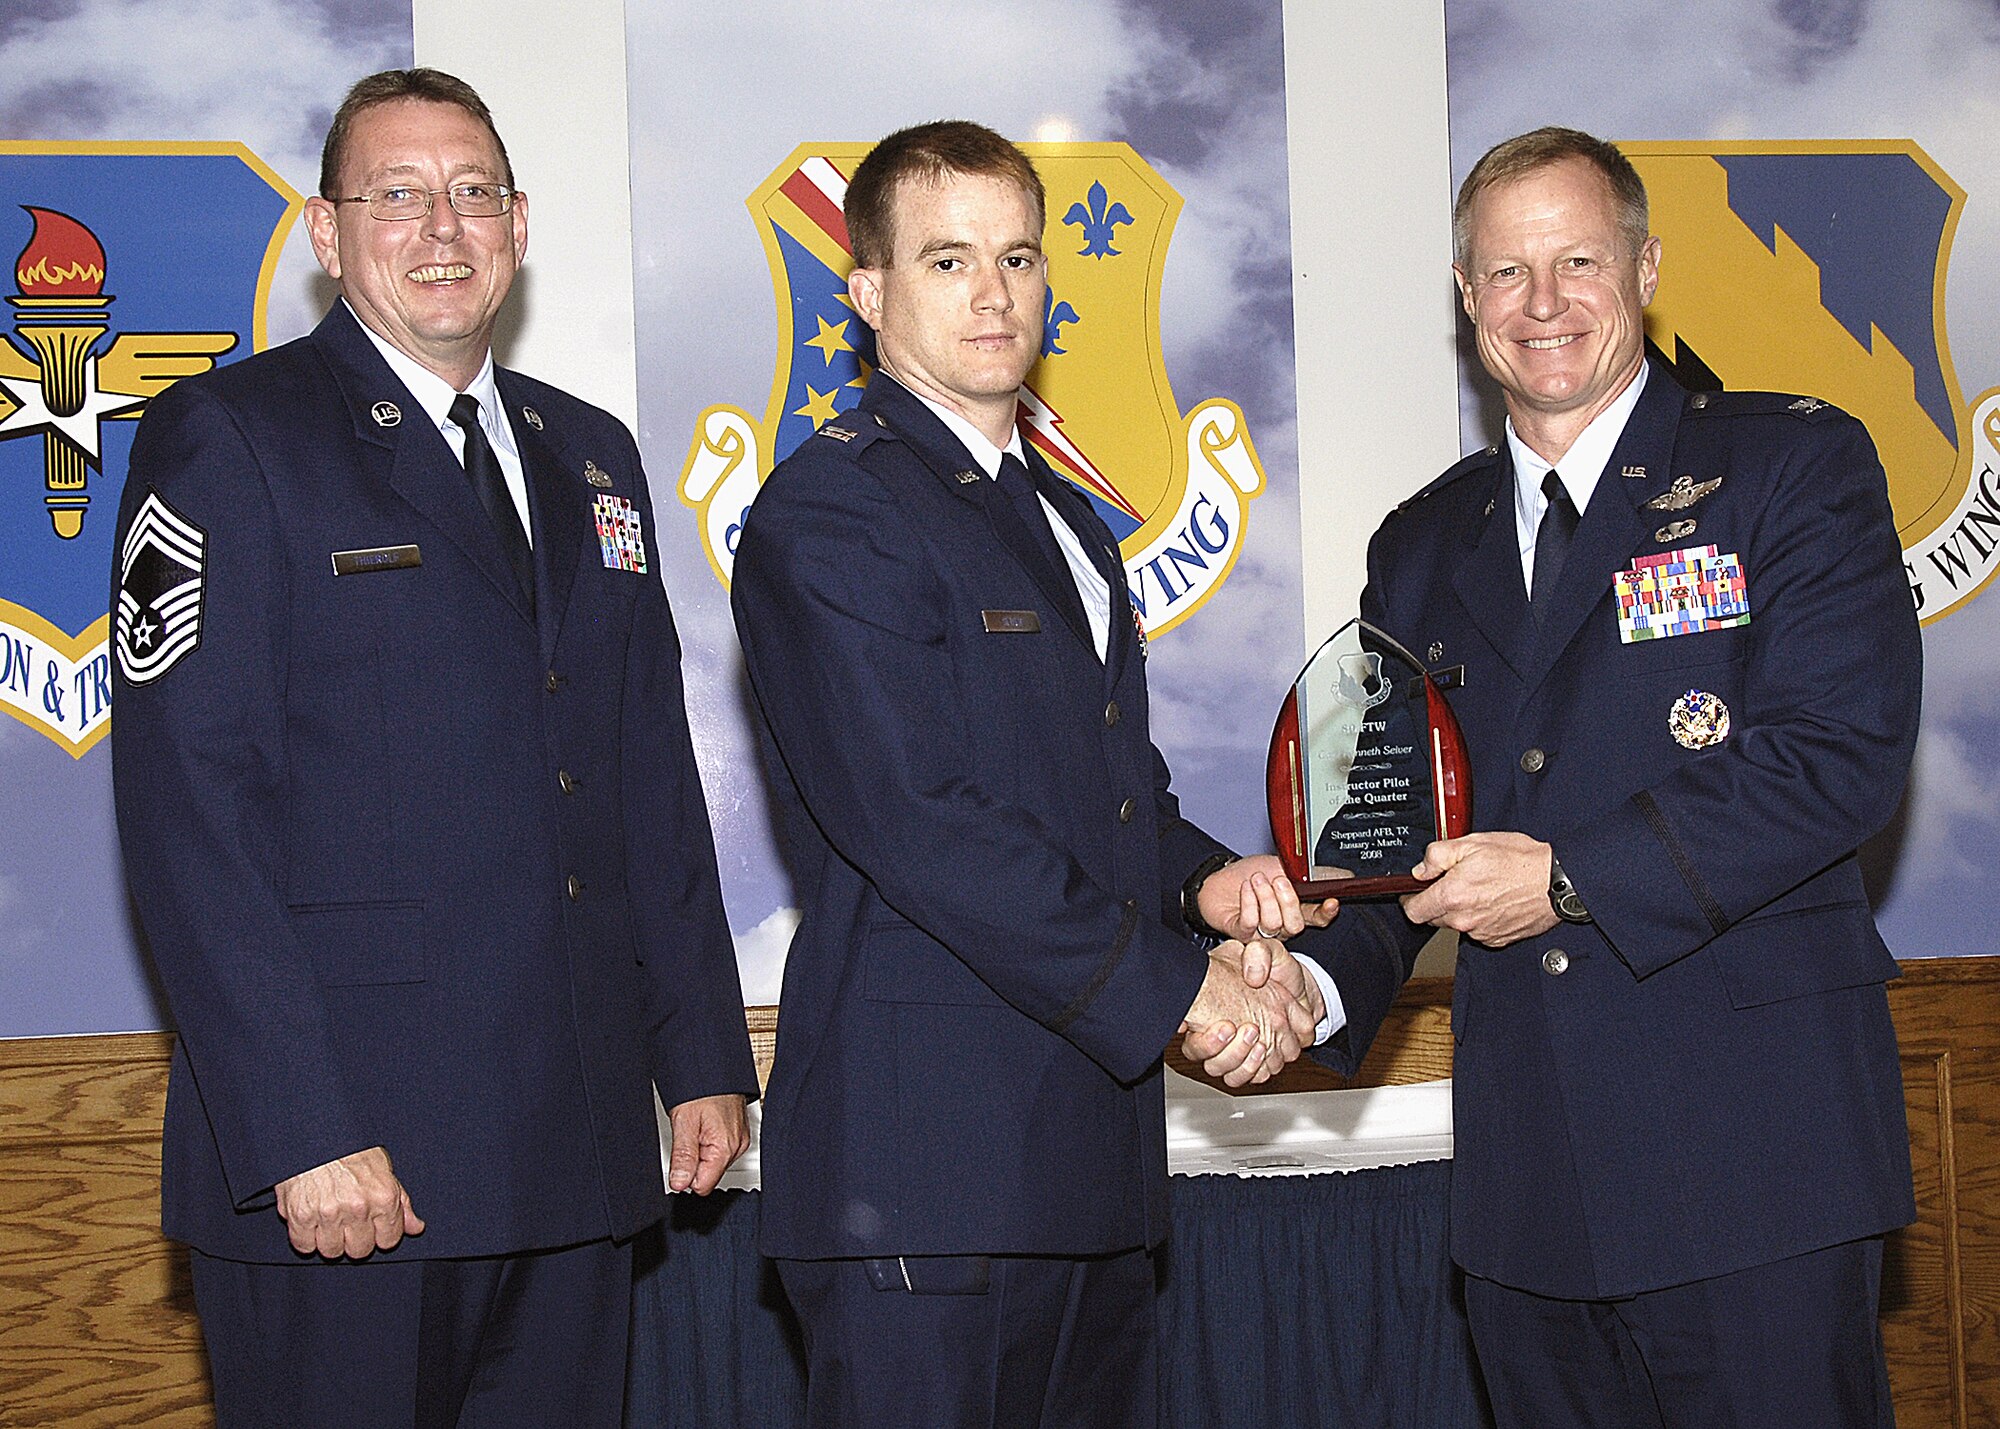 Capt. Kenneth Siever, 88th Fighter Training Squadron, accepts the Instructor Pilot of the Quarter award from 80th Flying Training Wing Commander Col. David Petersen April 22 during the wing's quarterly award ceremony. Captain Siever was recognized for having a 100 percent graduation rate in the Introduction to Fighter Fundamentals course. He is also working on a Masters of Business Administration degree. Also pictured is 80th FTW Superintendent Chief Master Sgt. Norman Theirolf. (U.S. Air Force photos/Harry Tonemah)